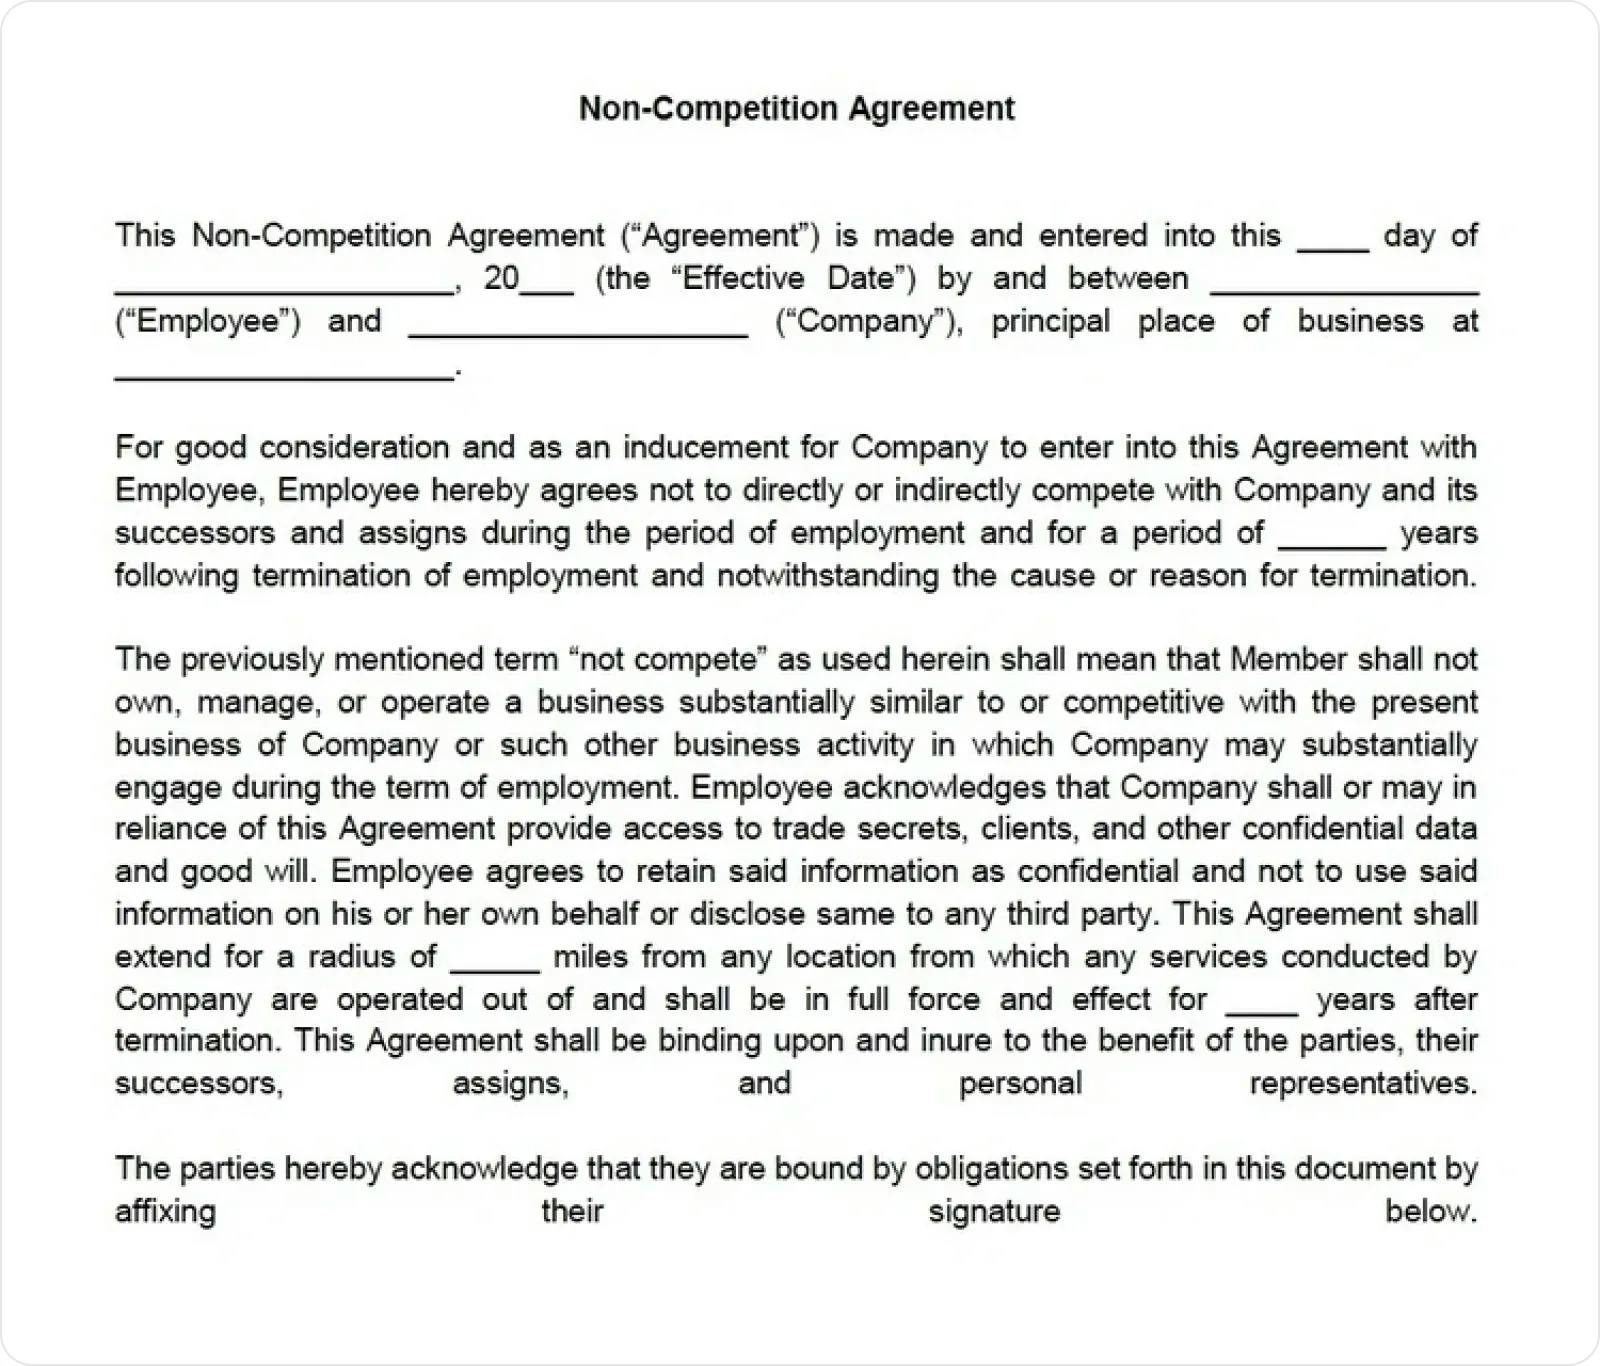 Non-competition Agreement